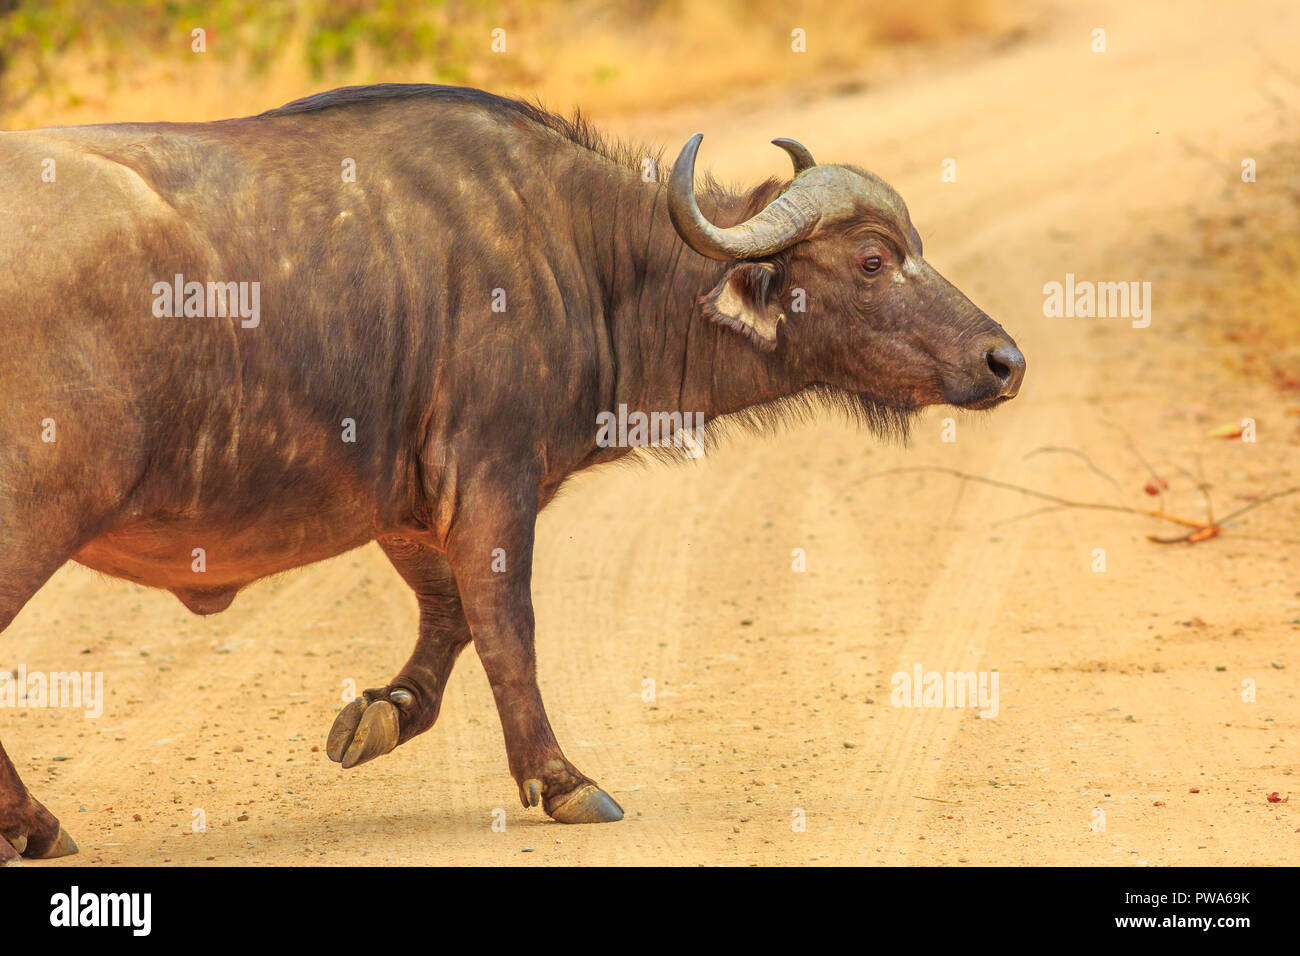 African buffalo, Syncerus caffer, walking on the gravel road inside the Kruger National Park, South Africa. Dry season. The Cape buffalo is a large African bovine part of the Big Five. Stock Photo